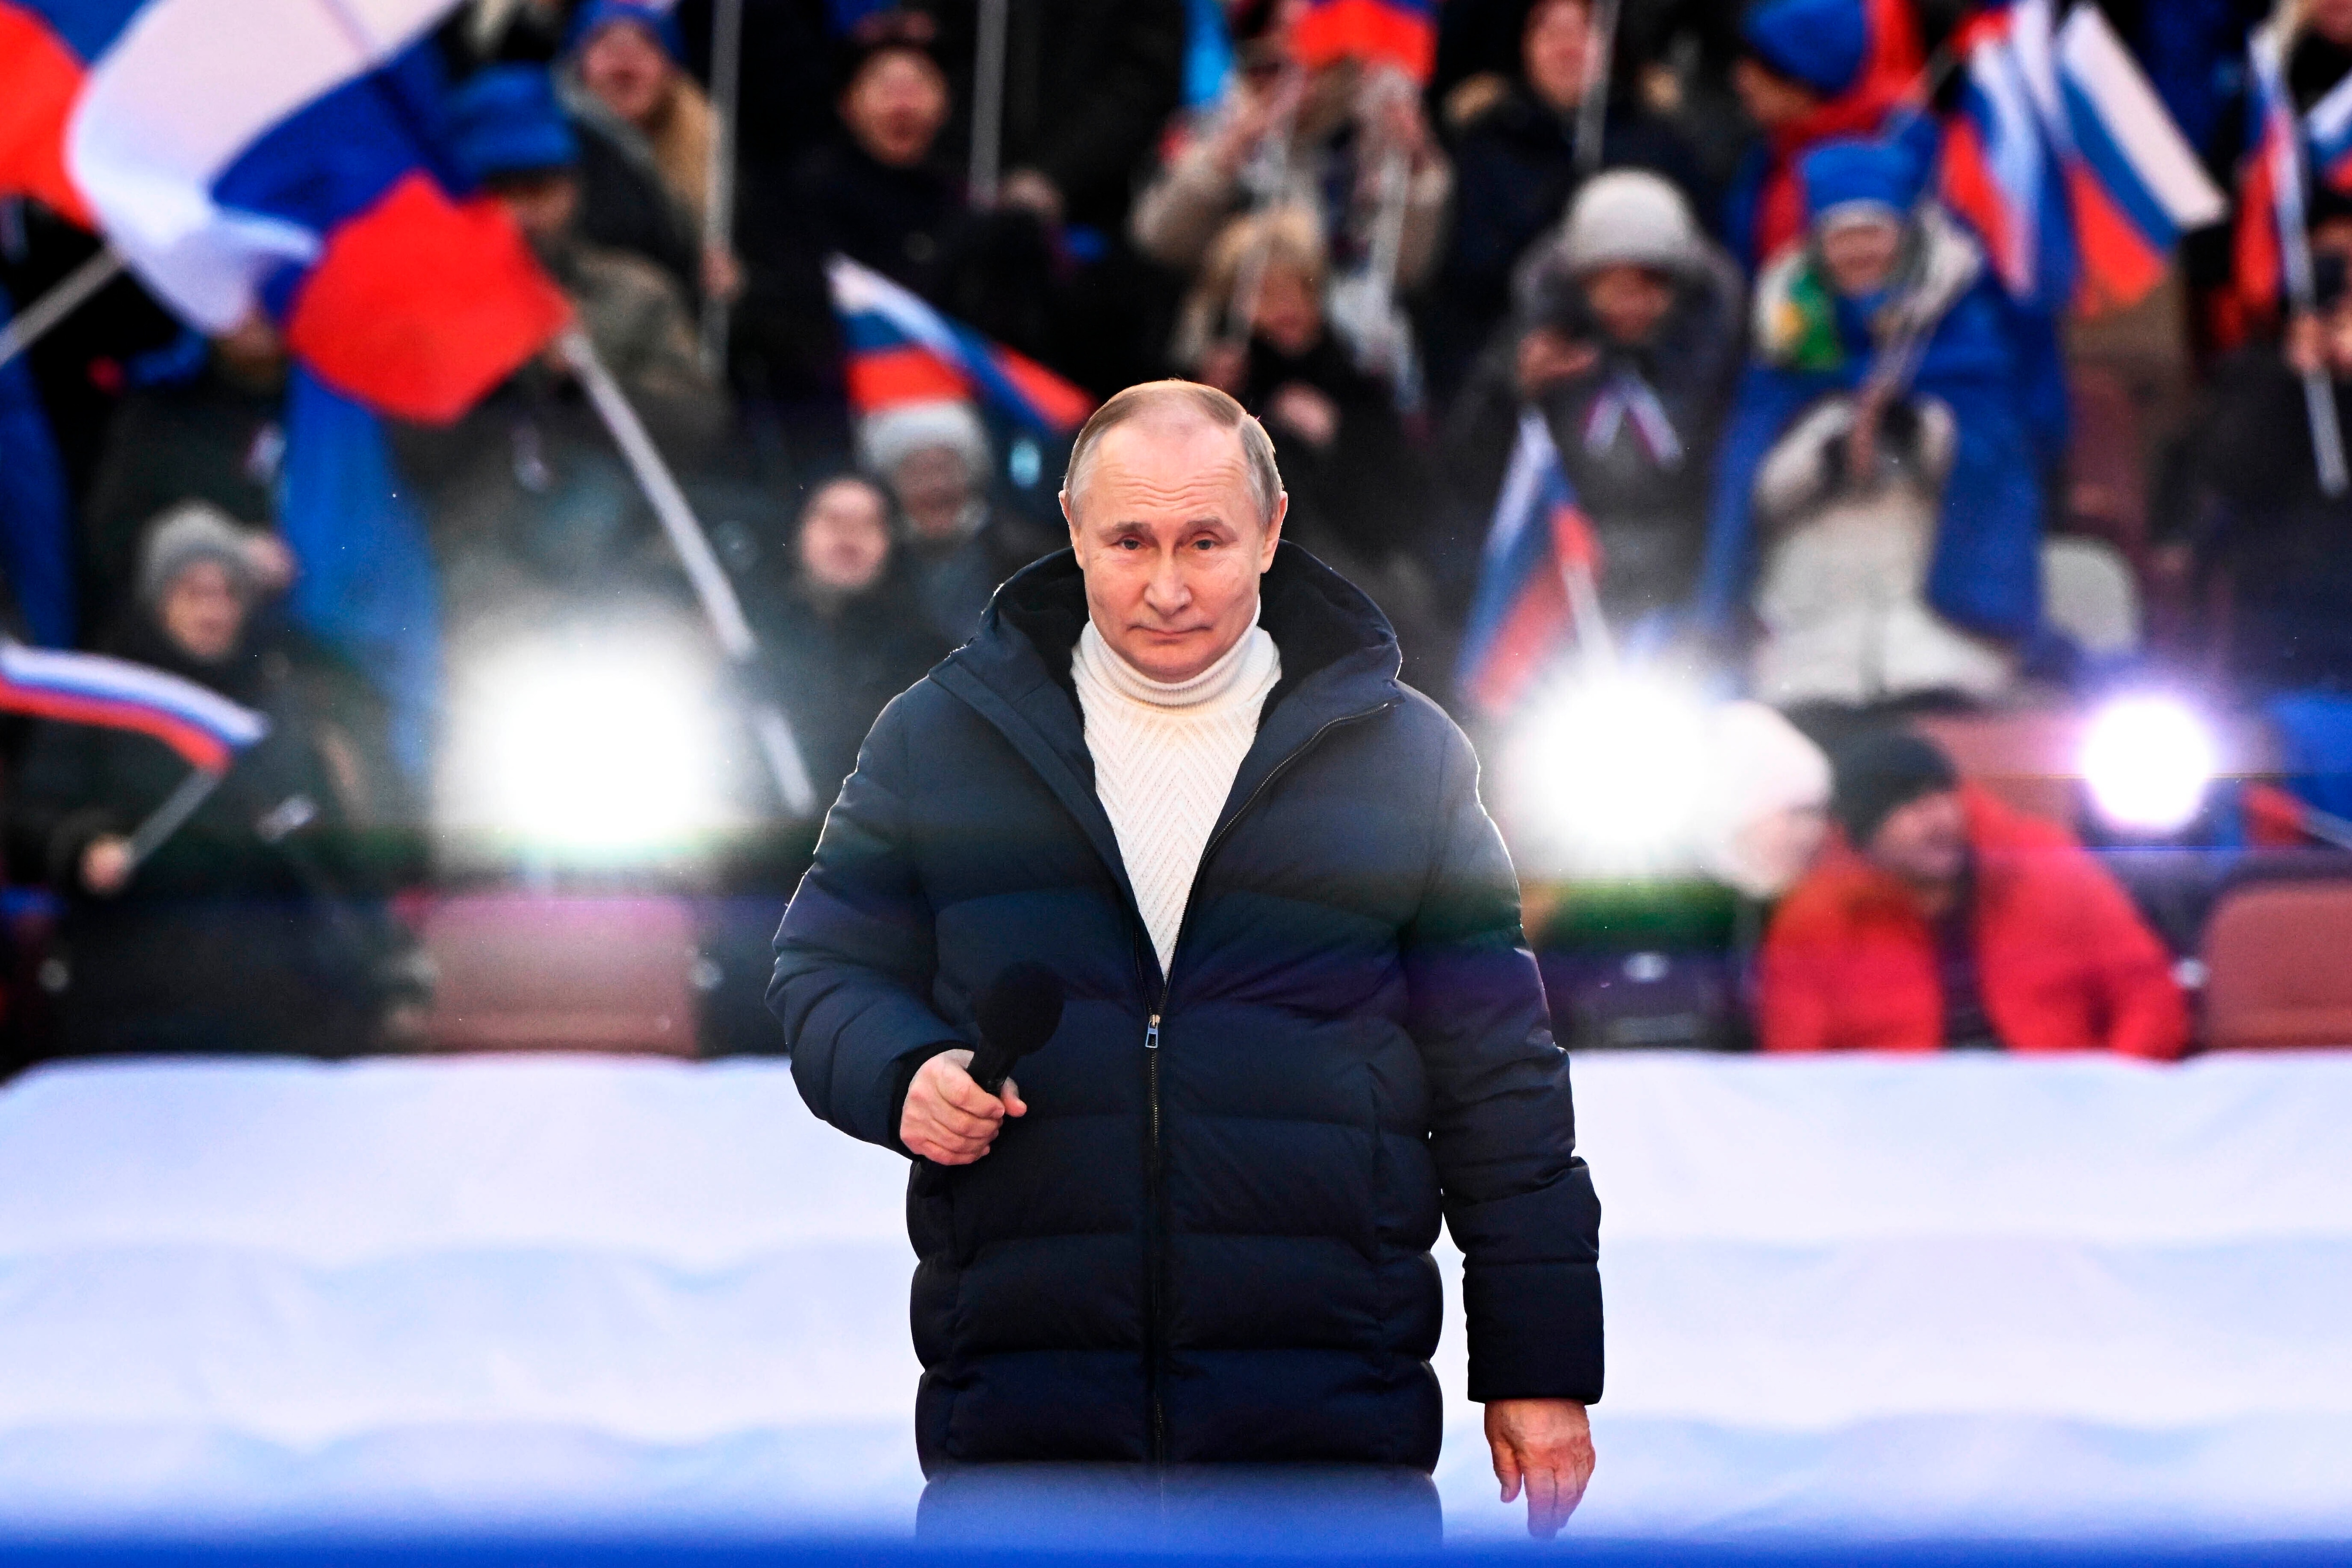 As Russian troops rained lethal fire on Ukrainian cities, Vladimir Putin appeared at a huge flag-waving rally to lavish praise on his Russian forces, while Ukrainian’s president accused the Kremlin of deliberately creating “a humanitarian catastrophe.” (AP)